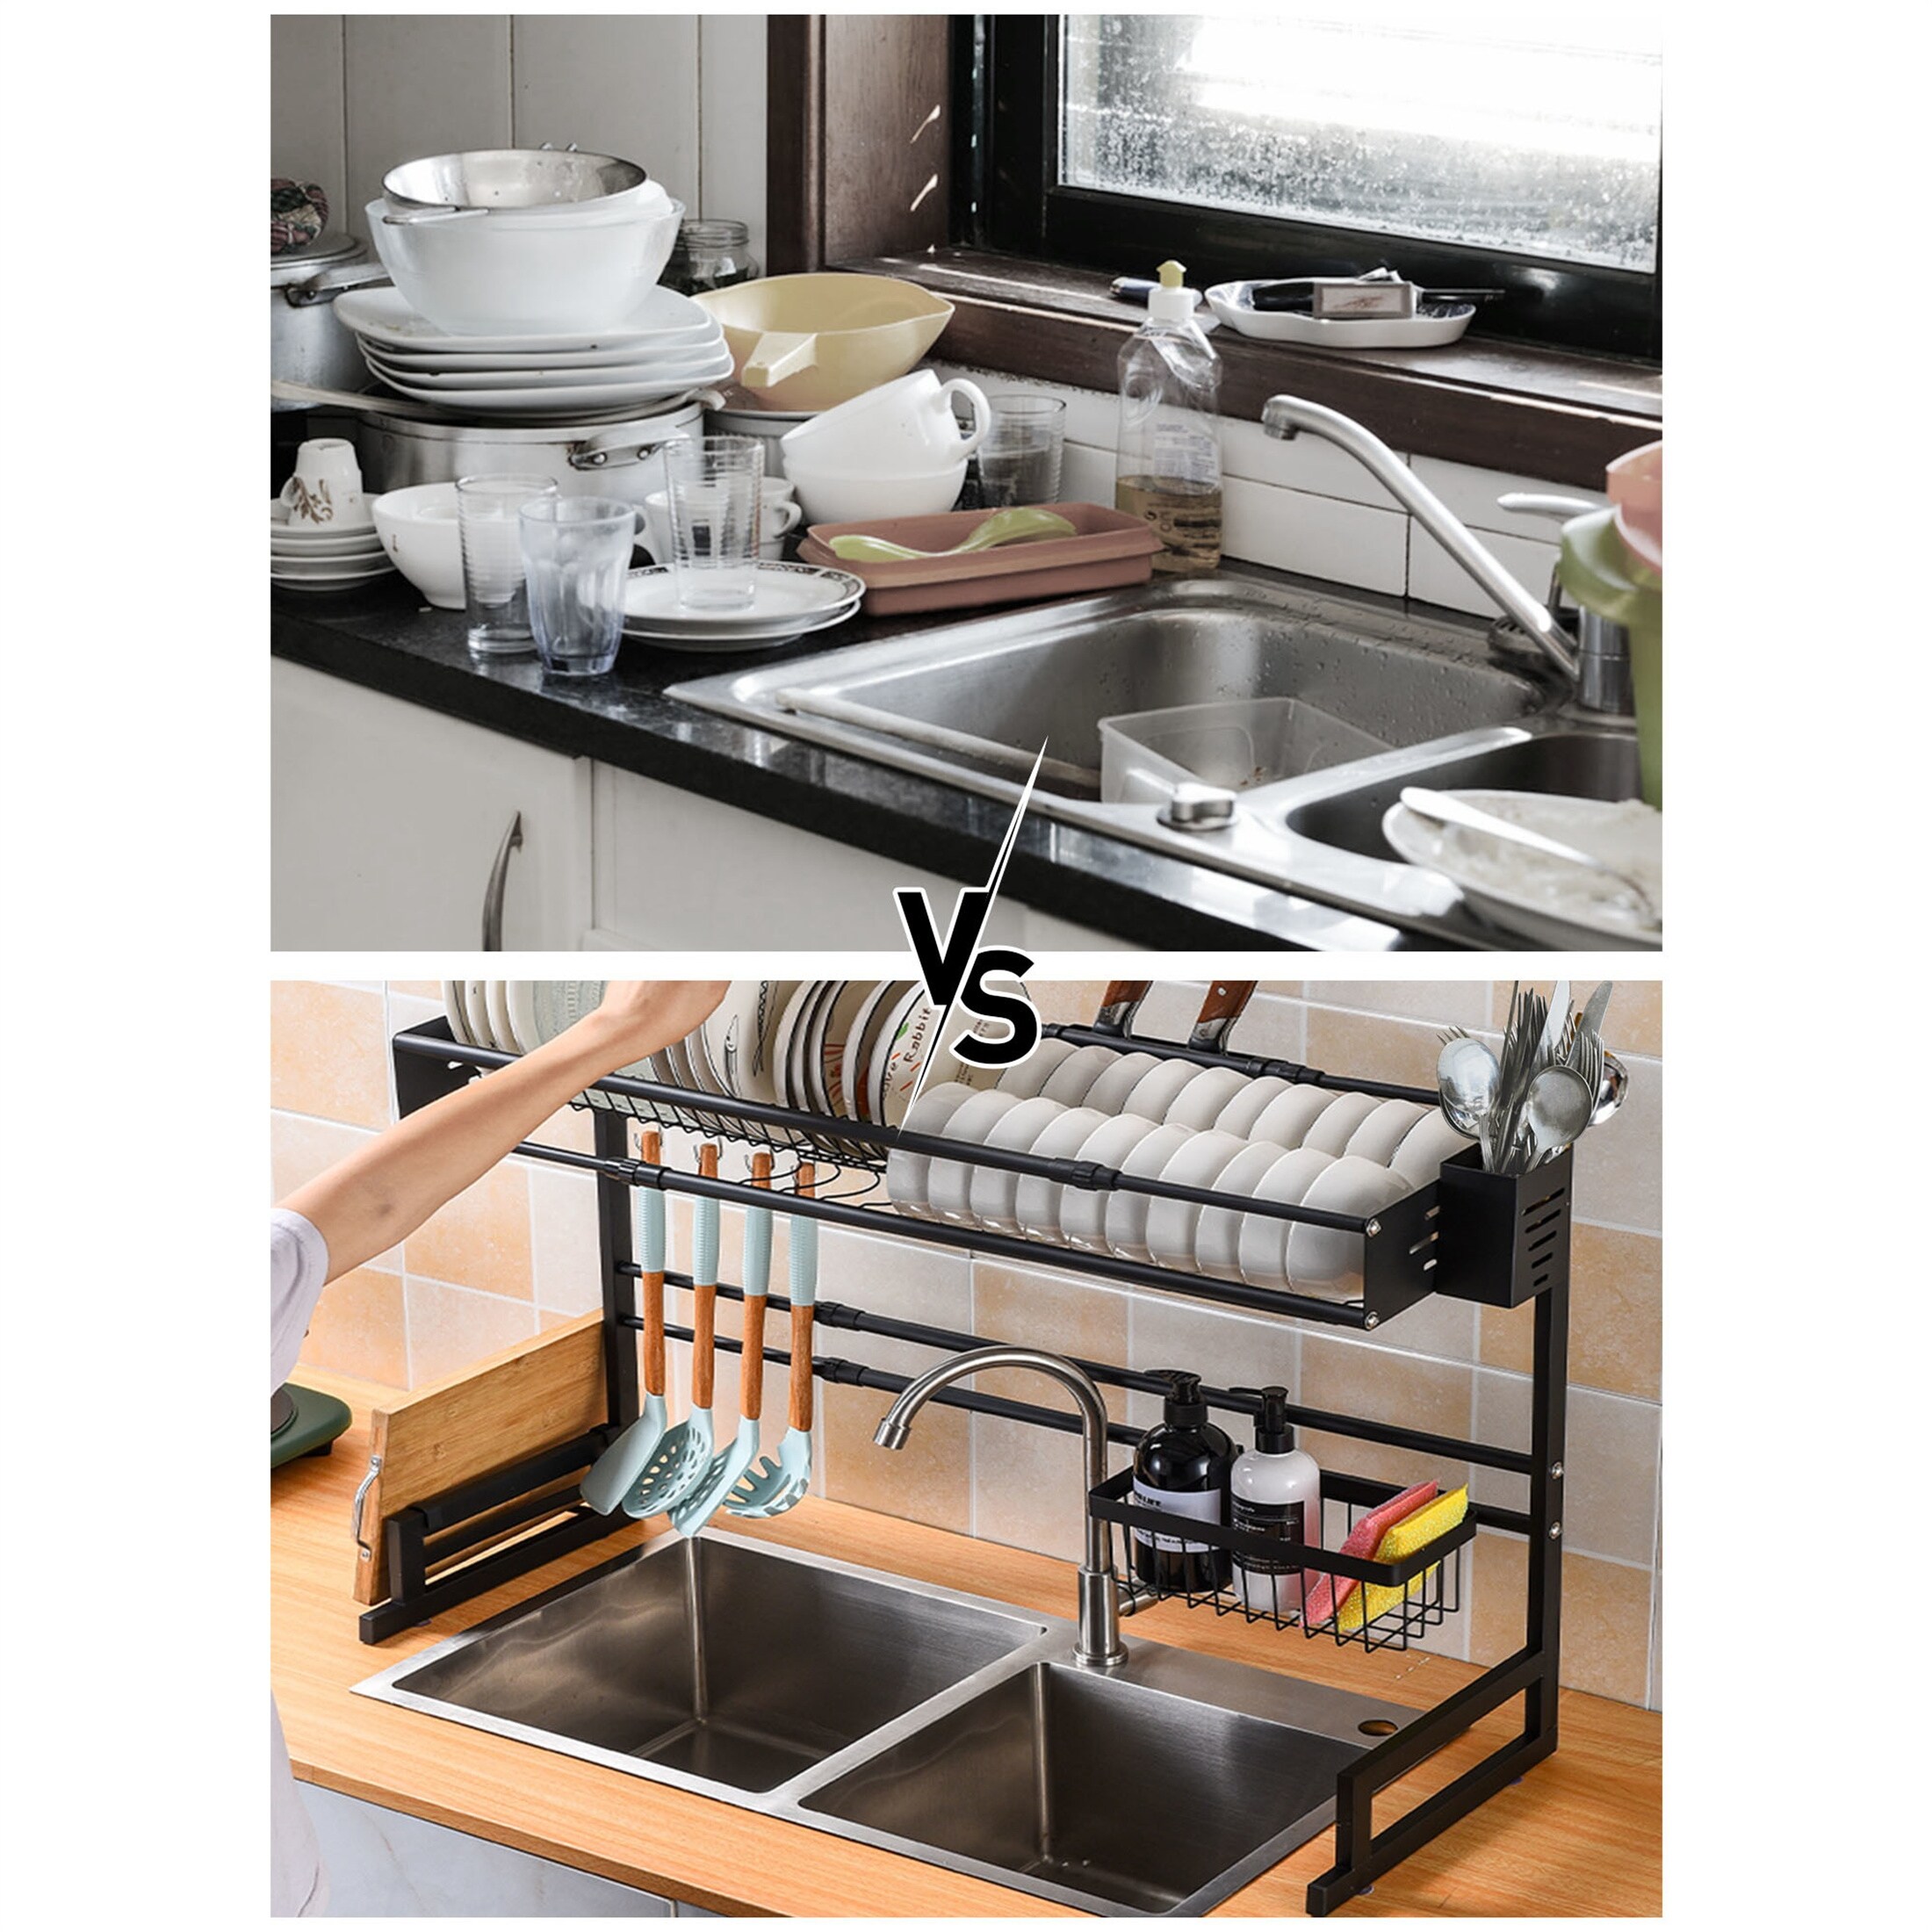 https://ak1.ostkcdn.com/images/products/is/images/direct/3ea095f381b54bbfc2f91b9a3454365ad739ff9a/Adjustable-Dish-Drainer-Drying-Rack-Kitchen-Organizer-Stainless-Steel.jpg